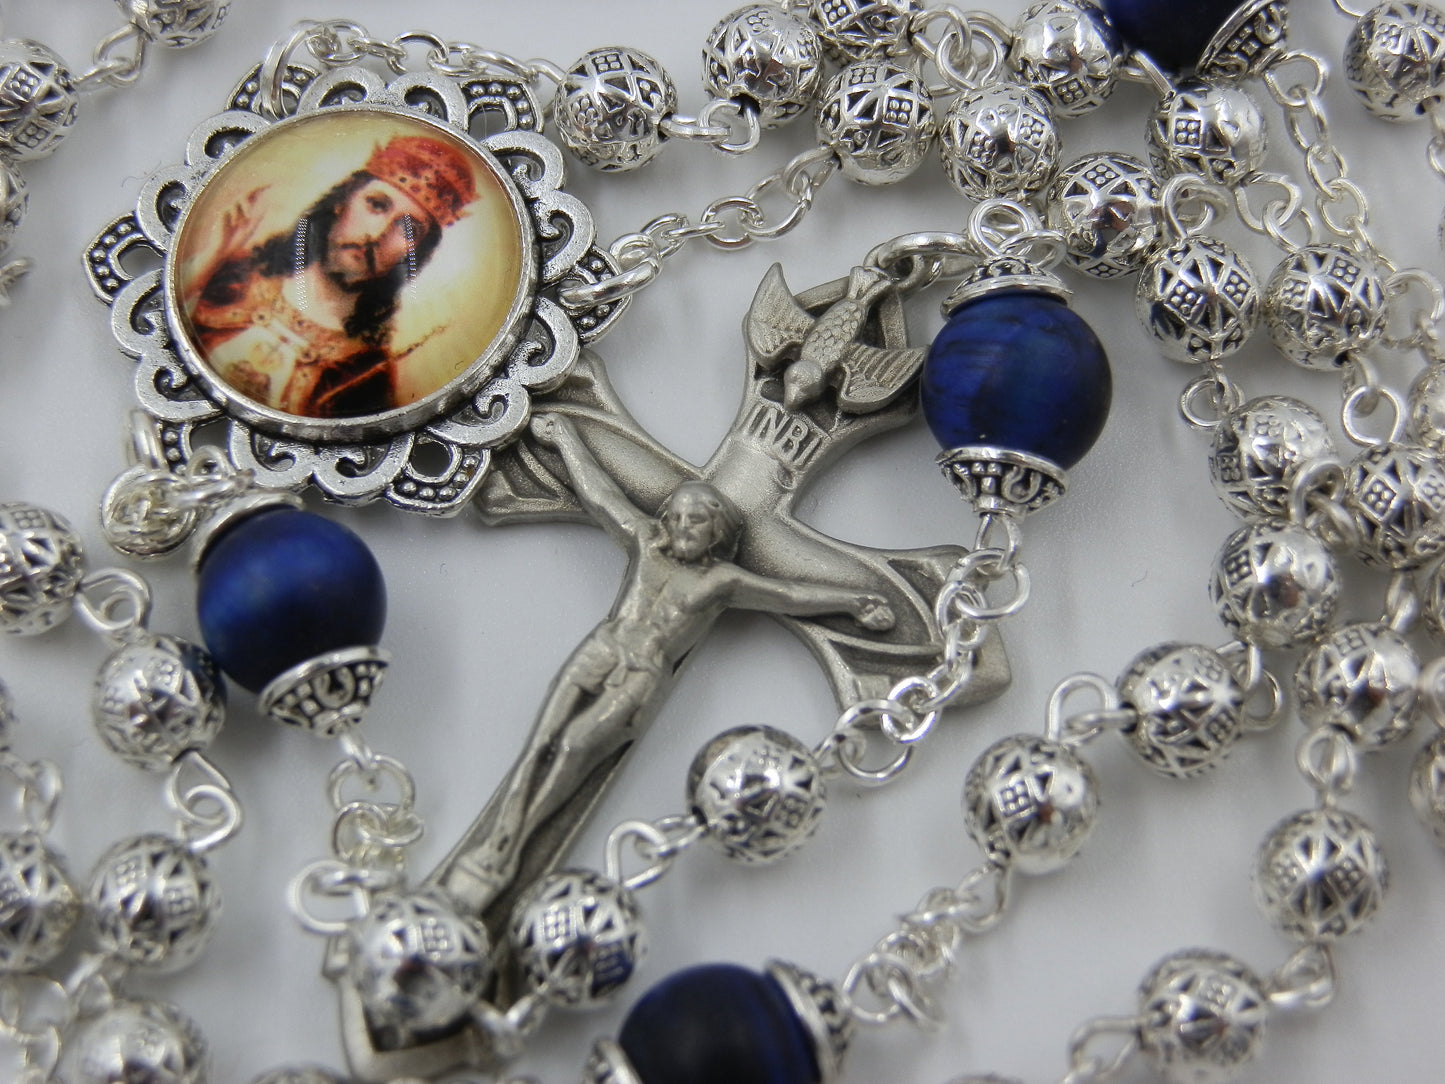 Christ The King Rosary beads, Silver Rosaries, Holy Spirit Pewter Crucifix, Lapis Lazuli rosaries, Rosary beads, Heirloom Rosaries.